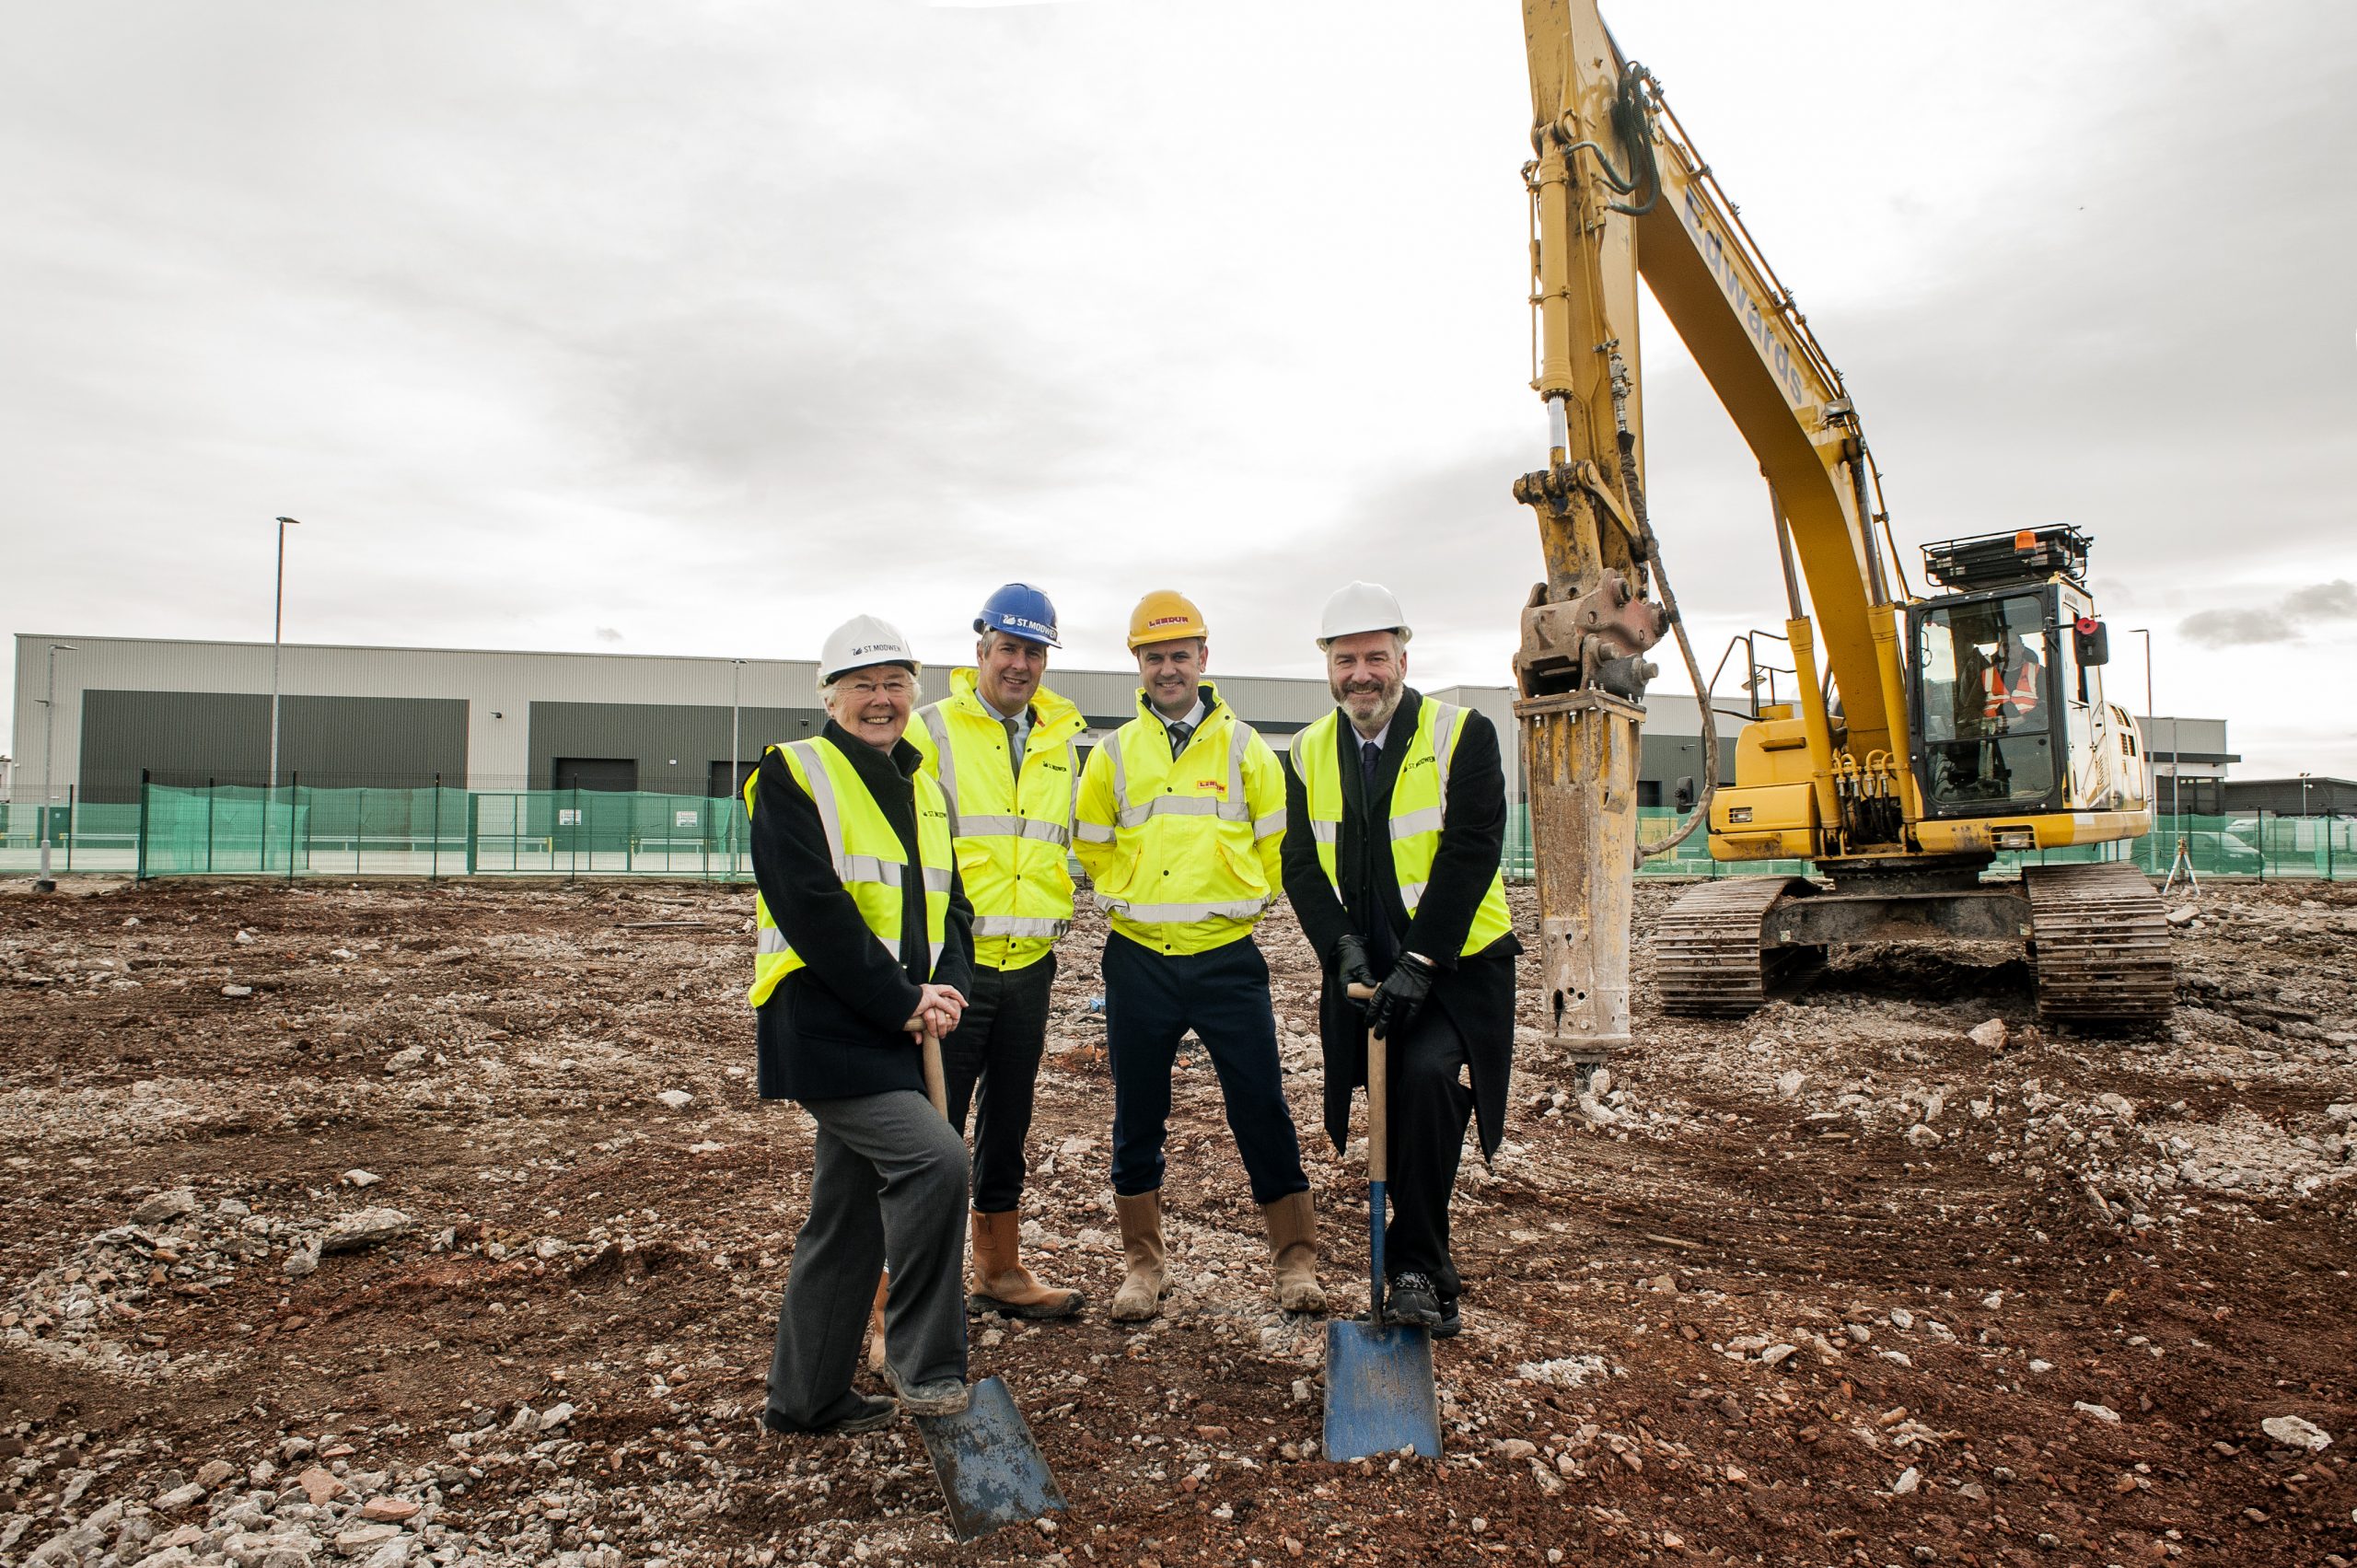 Work starts on-site at phase three of St Modwen Park Doncaster